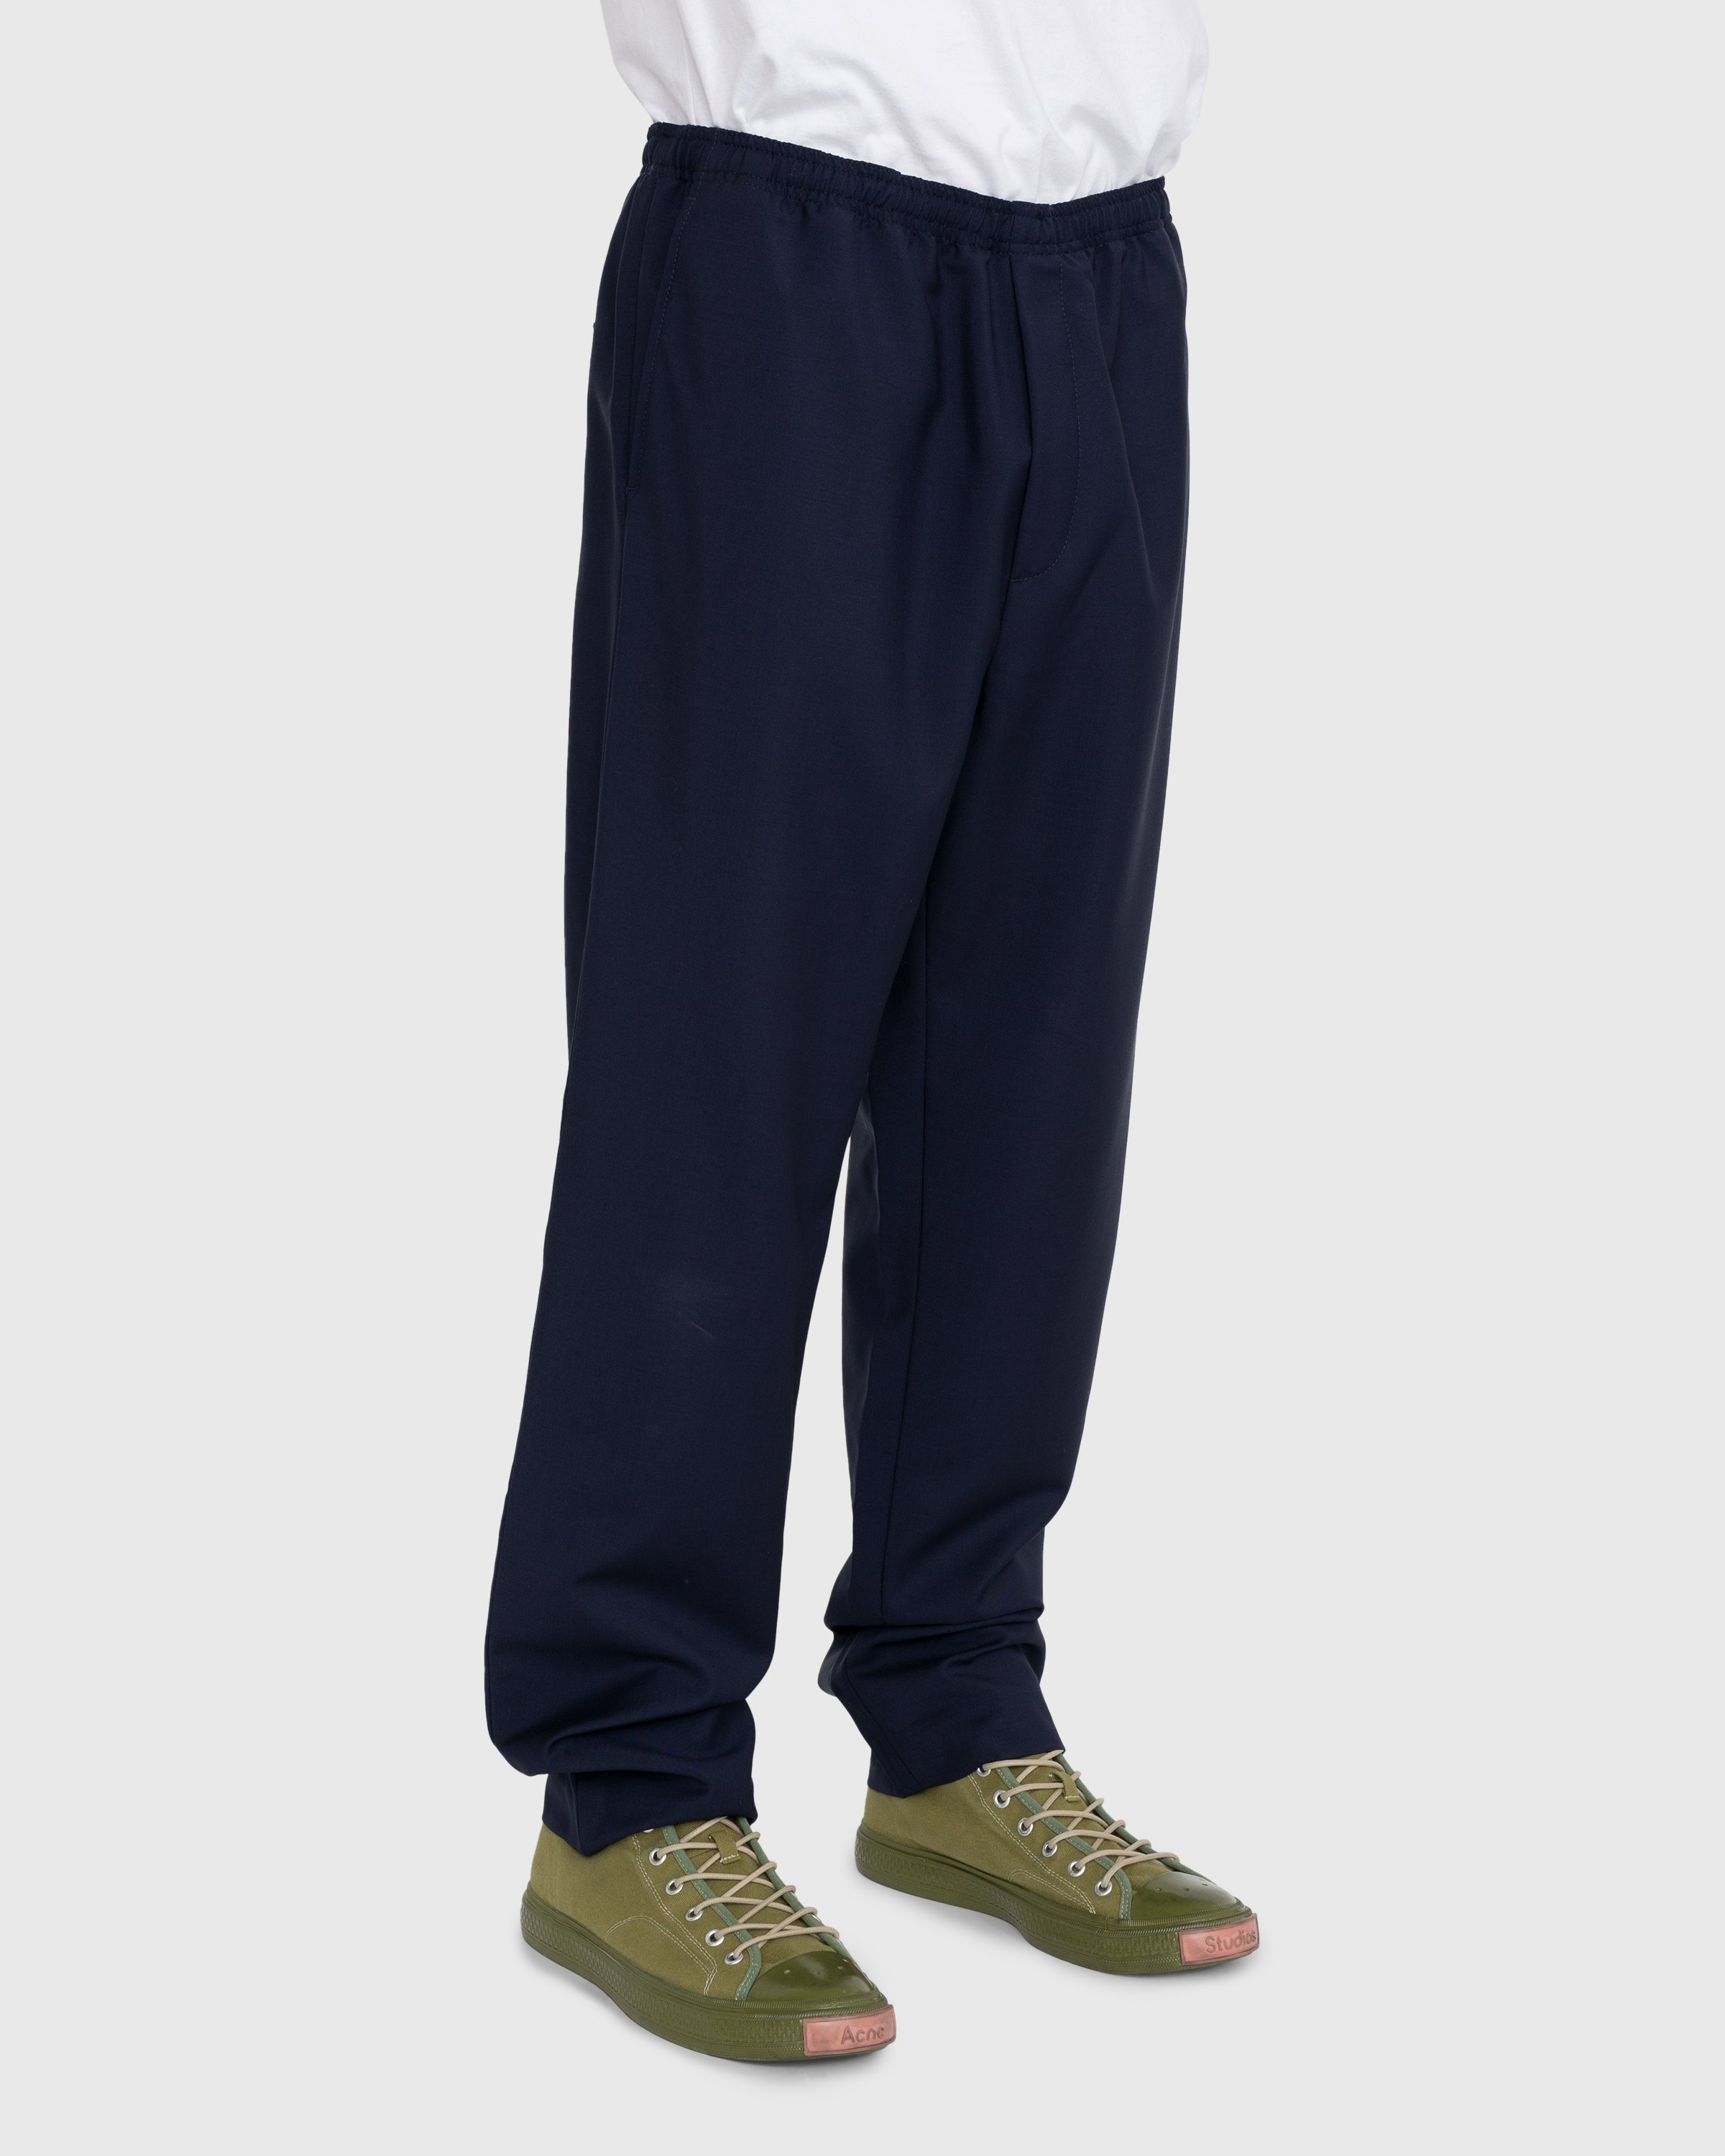 Acne Studios - Loose Fit Drawstring Trousers Blue - Clothing - Grey - Image 3